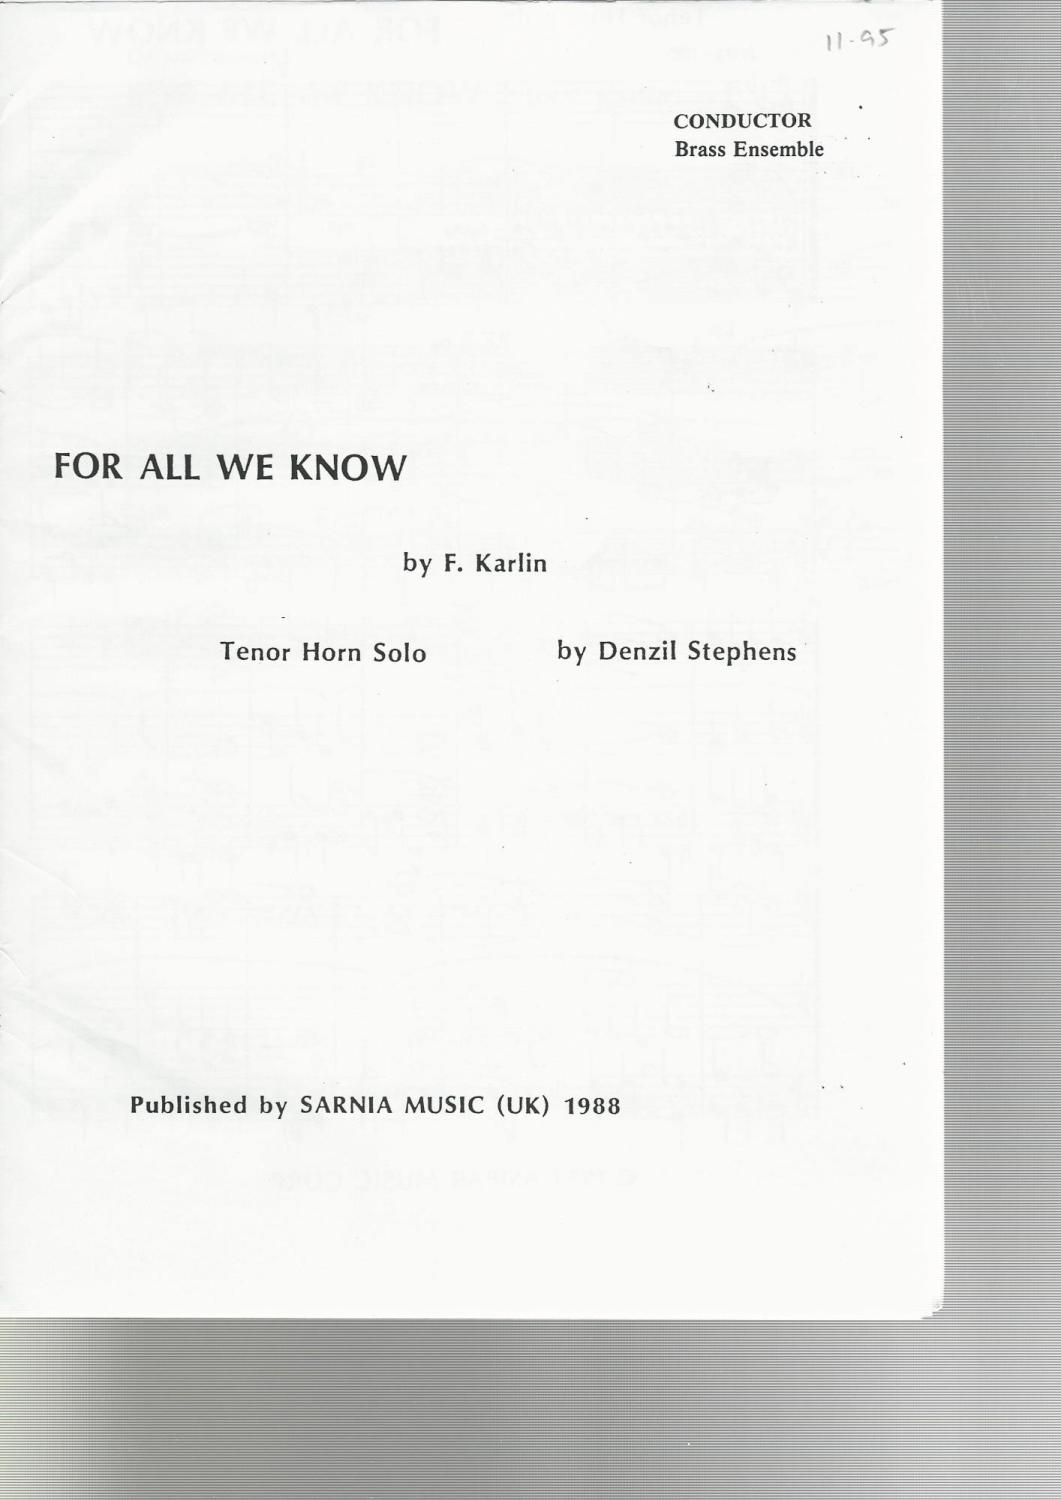 For All We Know, Tenor Horn Solo for 10-piece brass - F. Karlin arr. Denzil